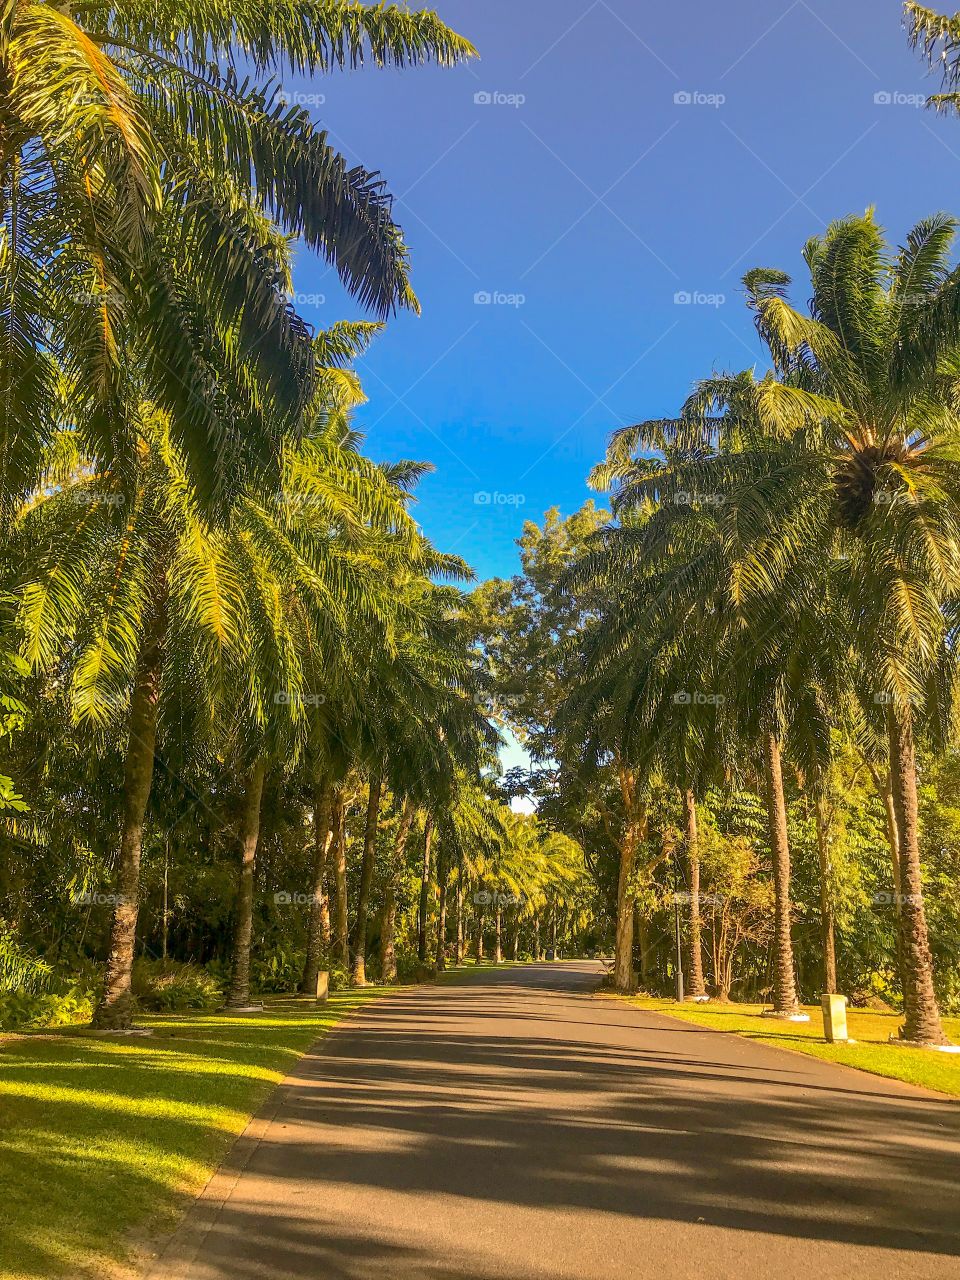 Walking along the palm lined path in tropical sunshine ..